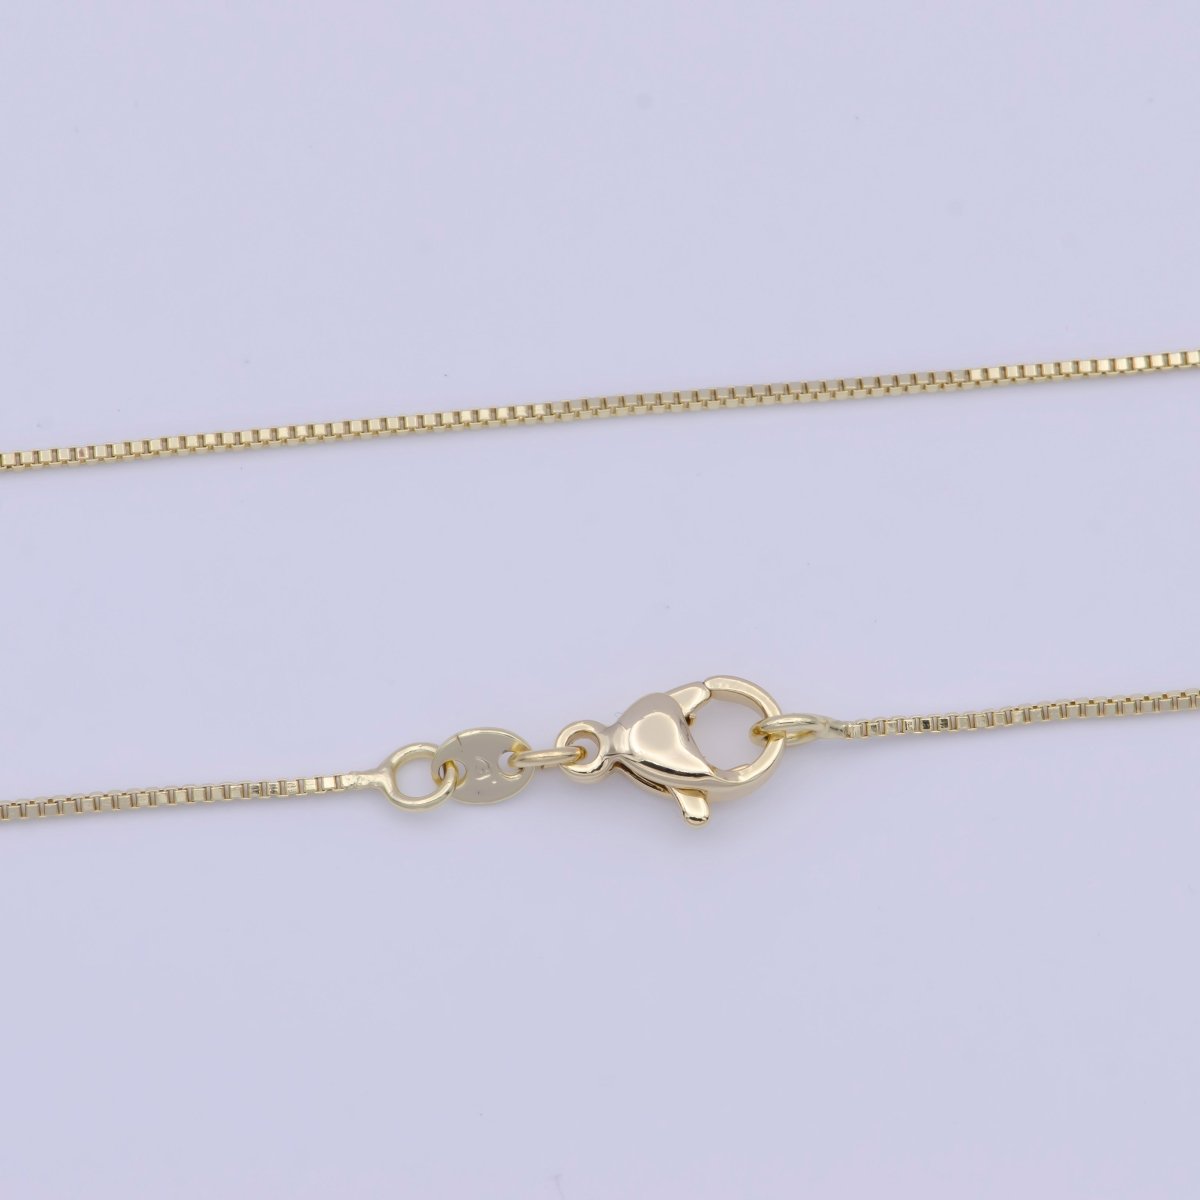 OS Clearance Pricing Overstock Fine Box Chain 18" Ready to Wear 14k Gold Filled Box Chain with Lobster Clasp, Simple Everyday Layering Necklace WA-1116 - DLUXCA